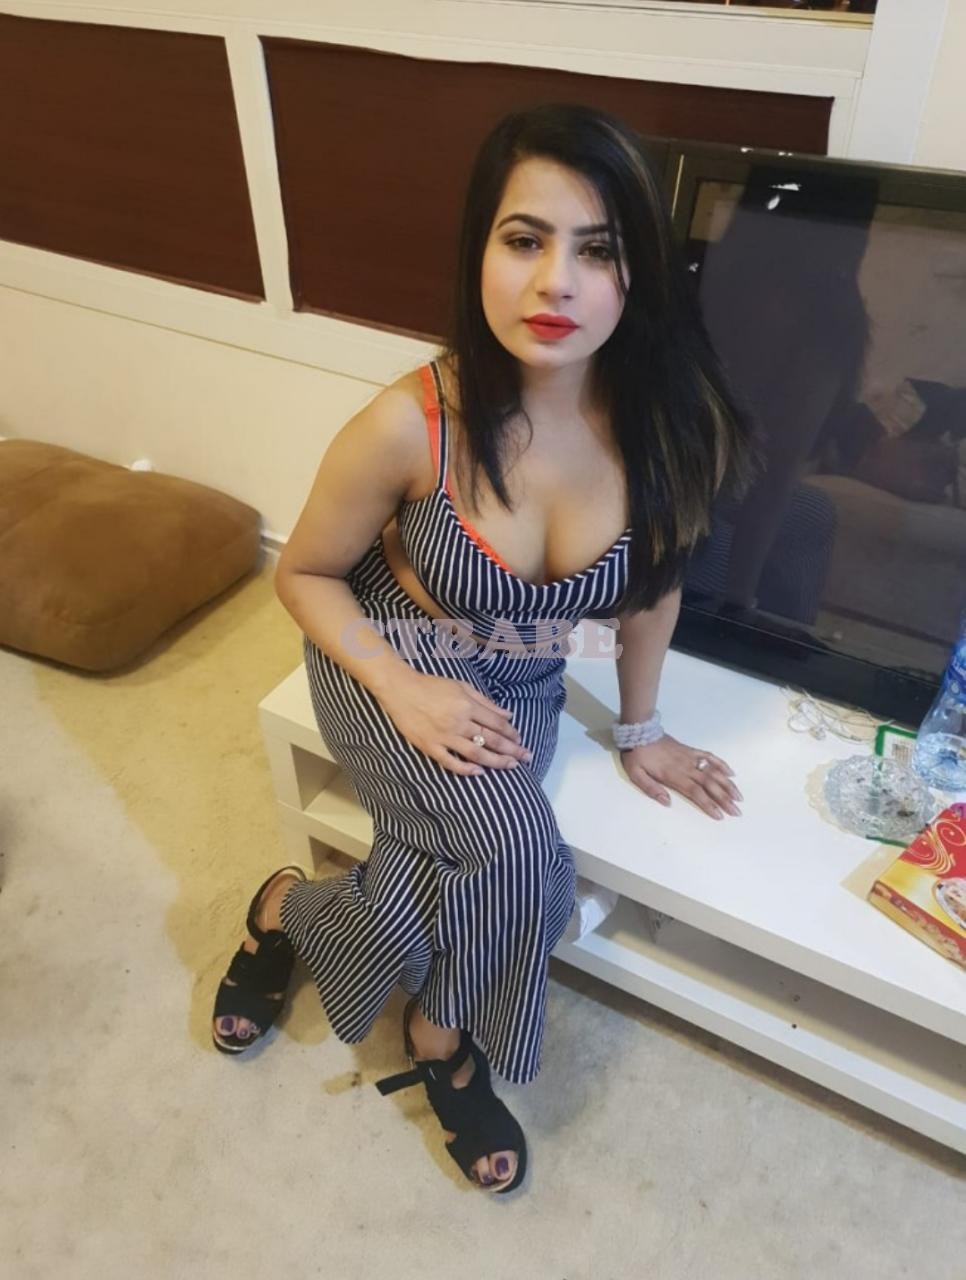 100% genuine call girl in Gwalior  low price available 